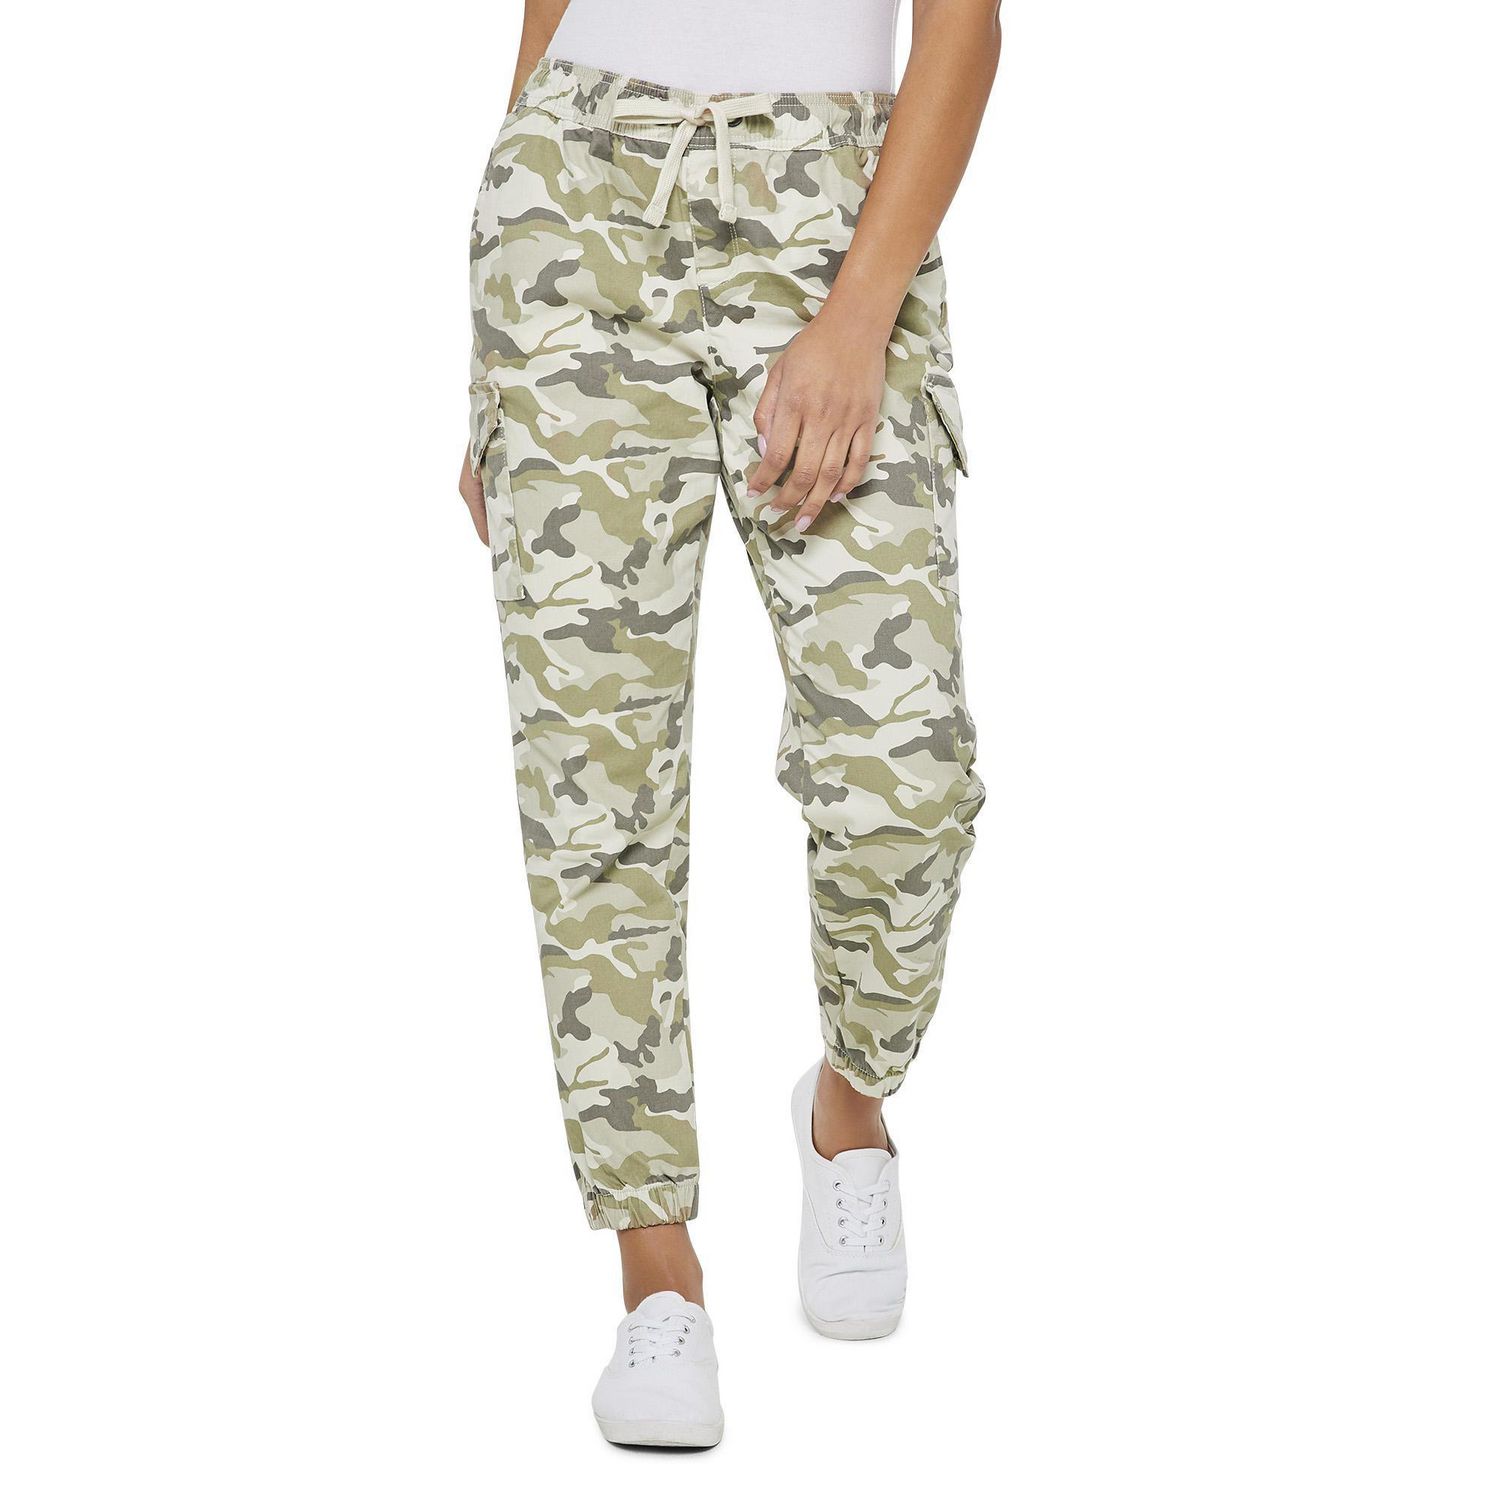 George Women's Printed Pull-On Cargo Jogger | Walmart Canada